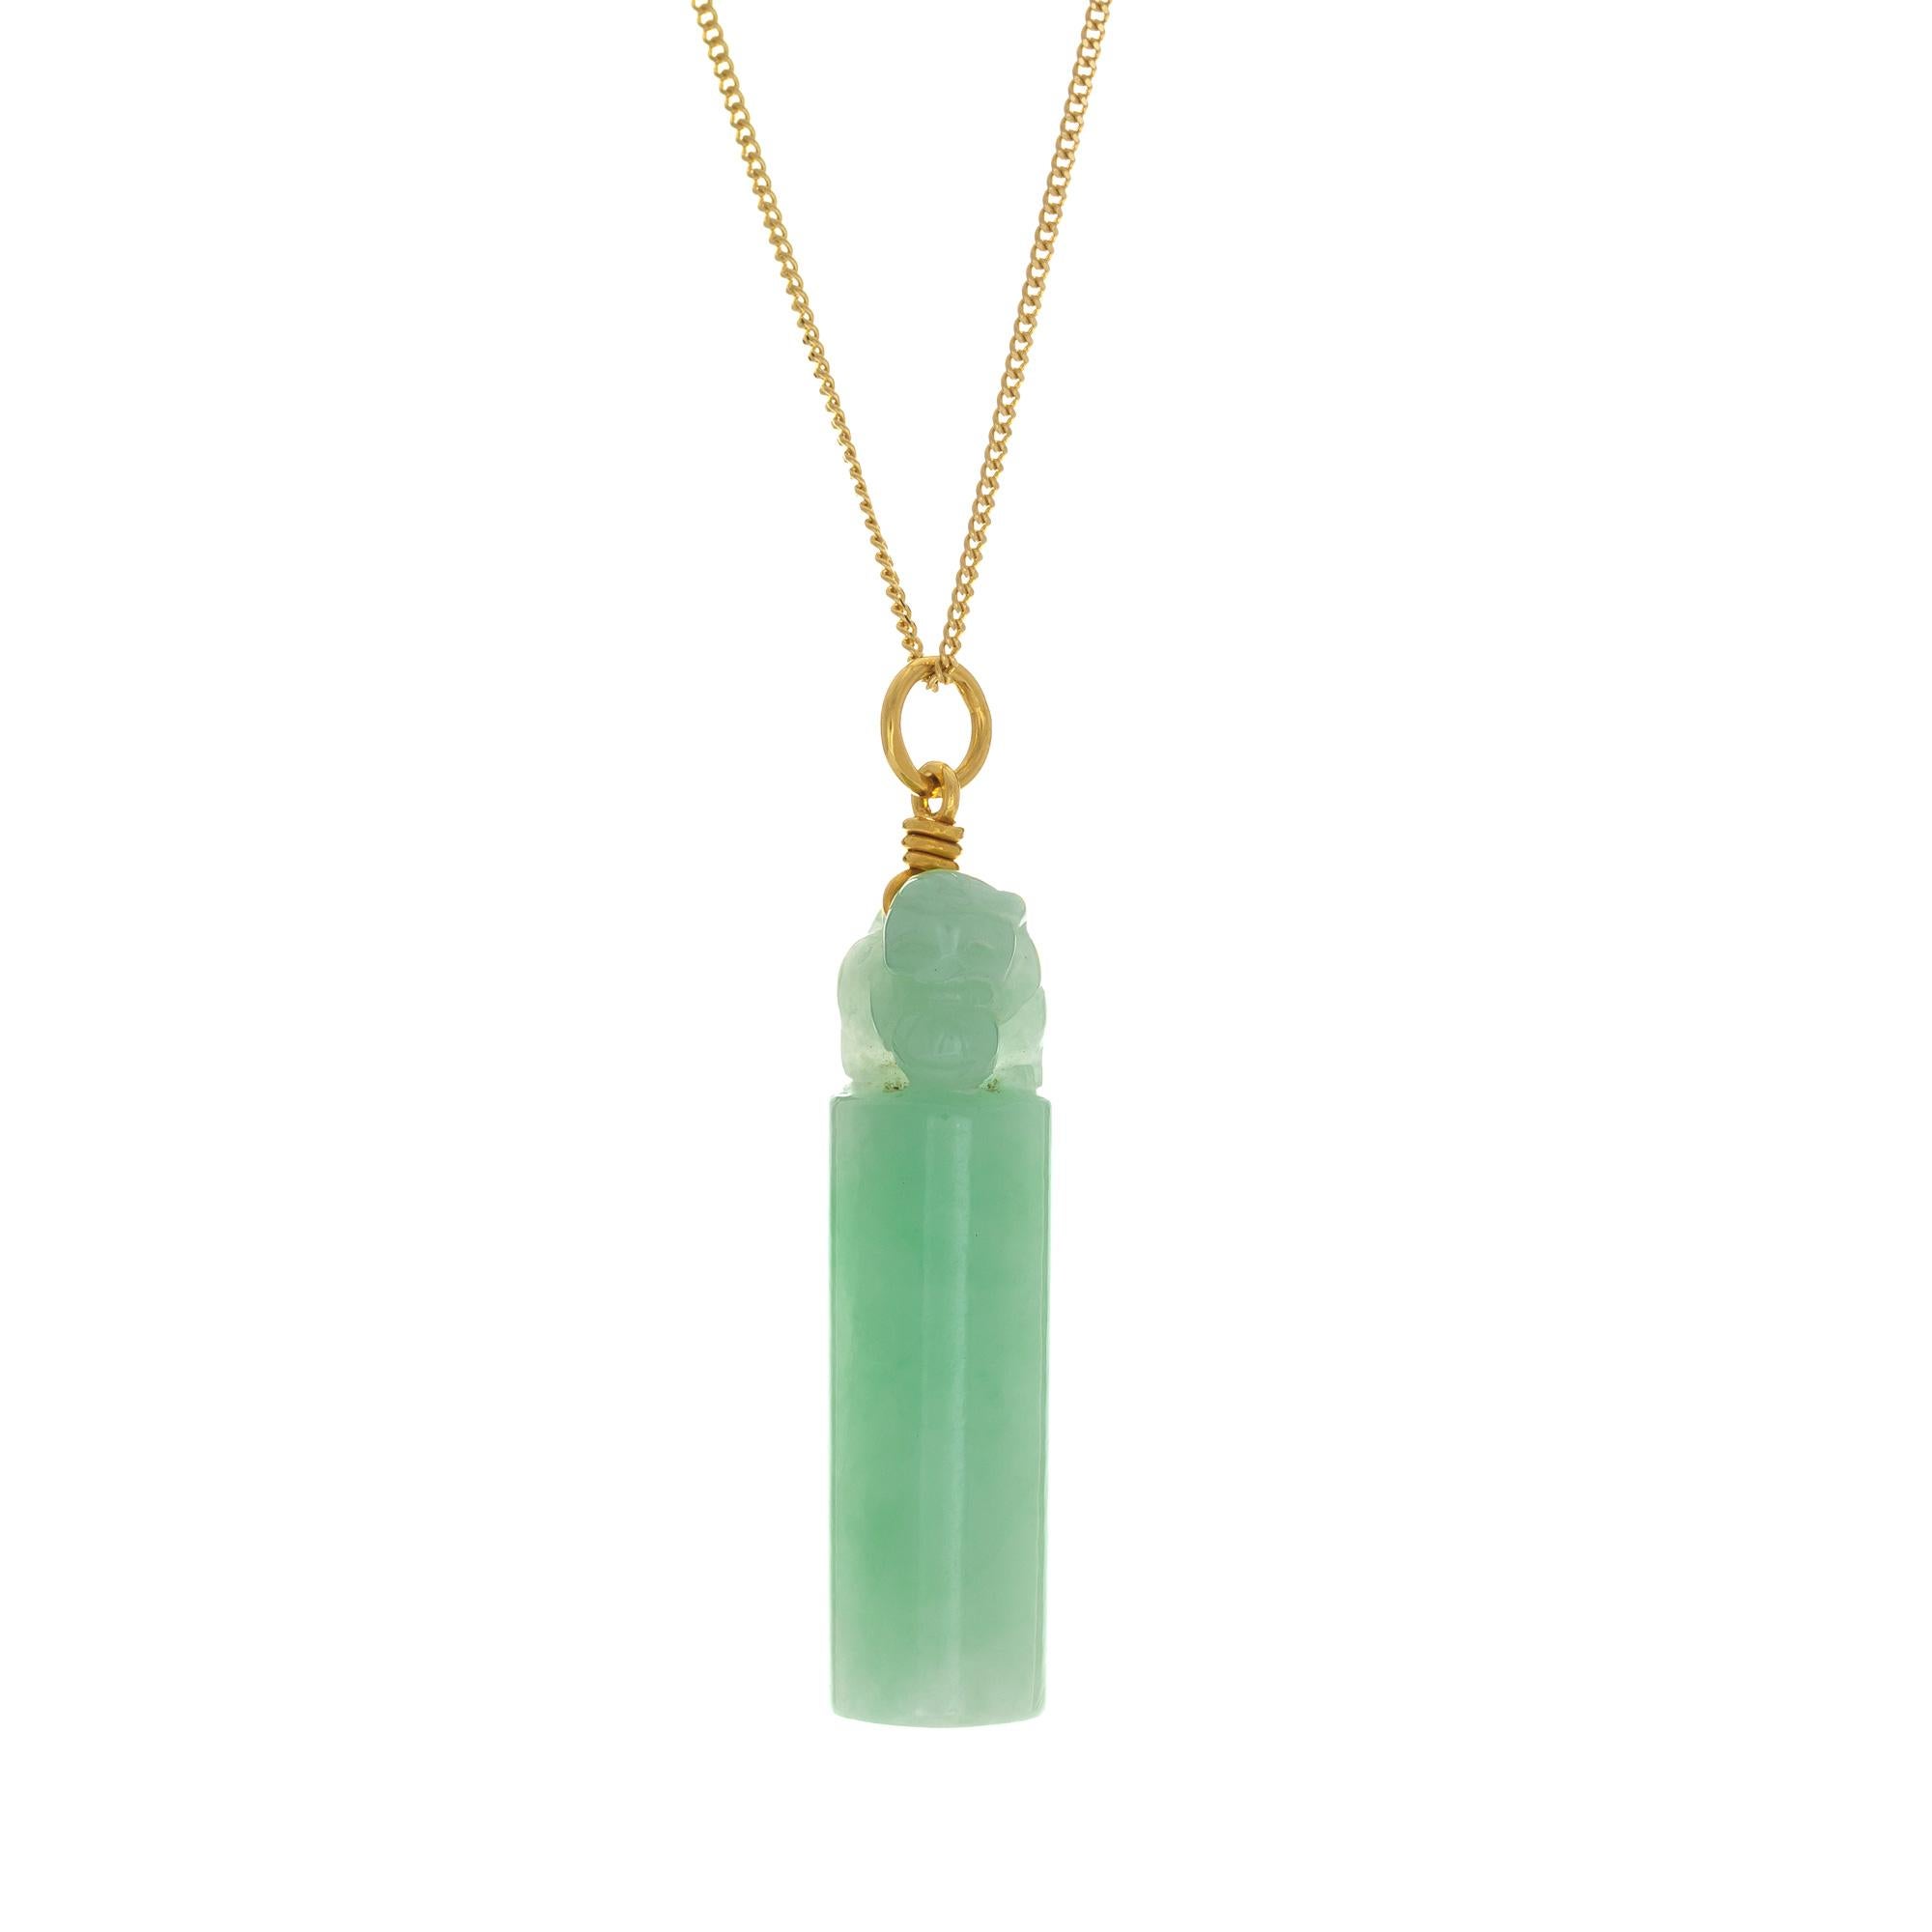 Mottled green natural jadeite jade tubular pendant with a carved dog at the top suspended from an 18 Inch 14k yellow gold chain

1 pierced tubular carved mottled green jadeite jade GIA Certificate #6203372876
14k yellow gold
Stamped: 750
Top to